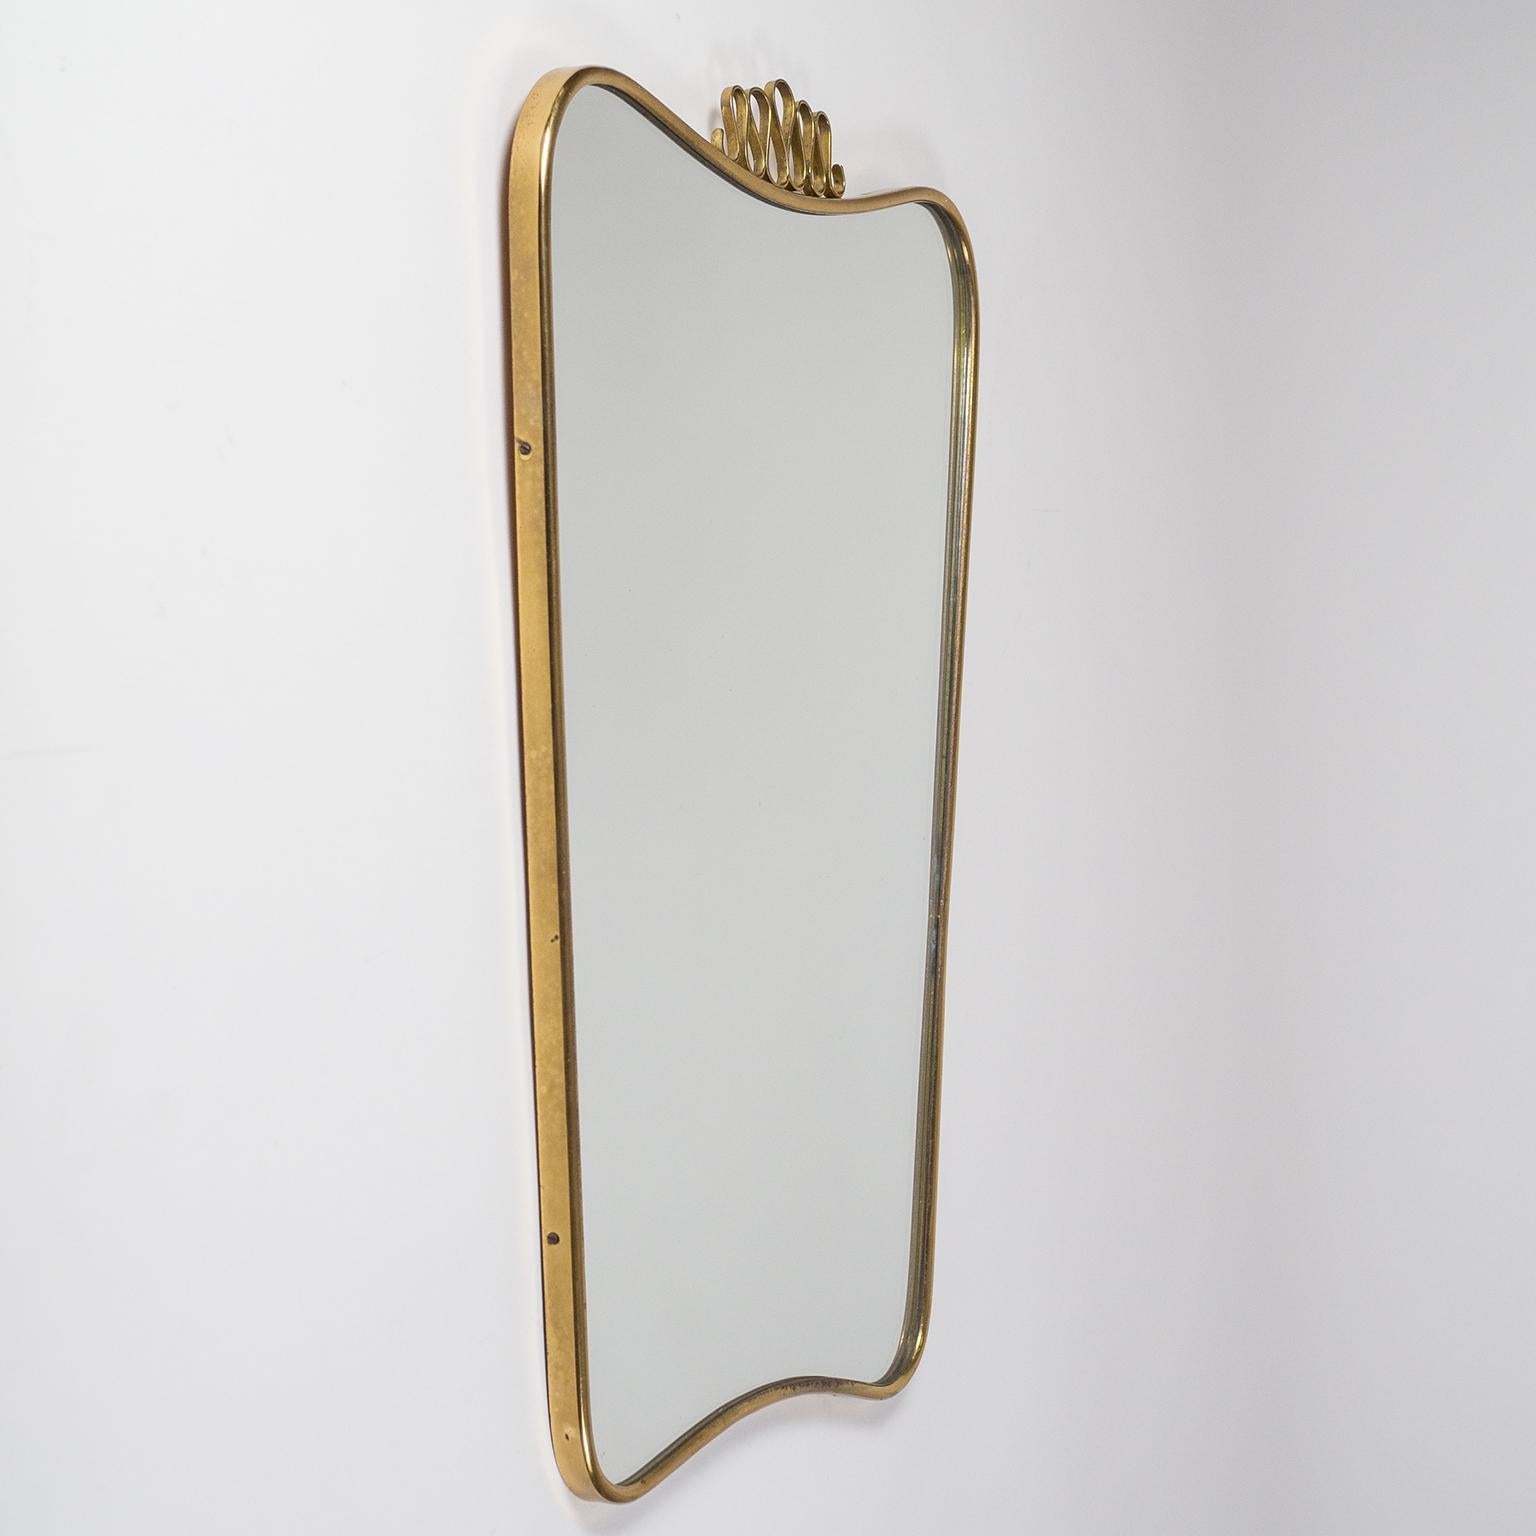 Lovely Italian brass mirror in the style of Gio Ponti. Continuous curved brass rim with an ondulating brass finial. Stamped 